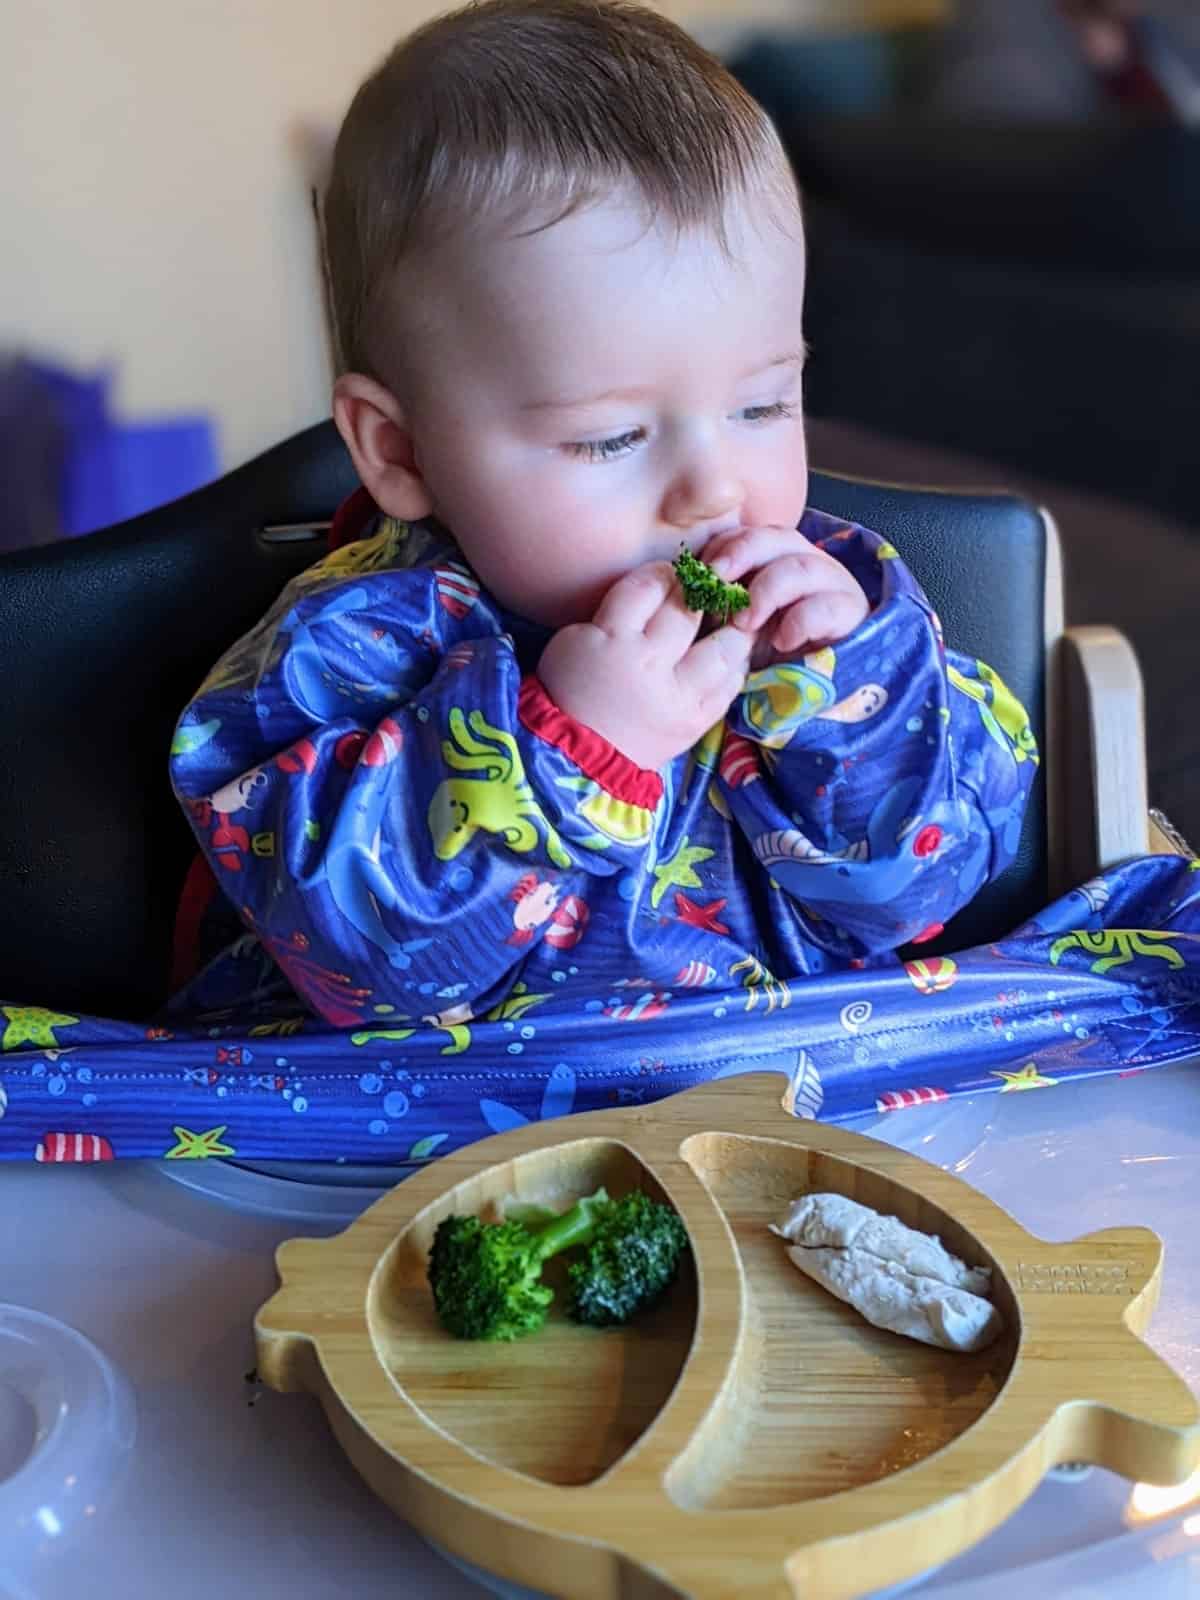 Baby eating broccoli florets and chicken strips.